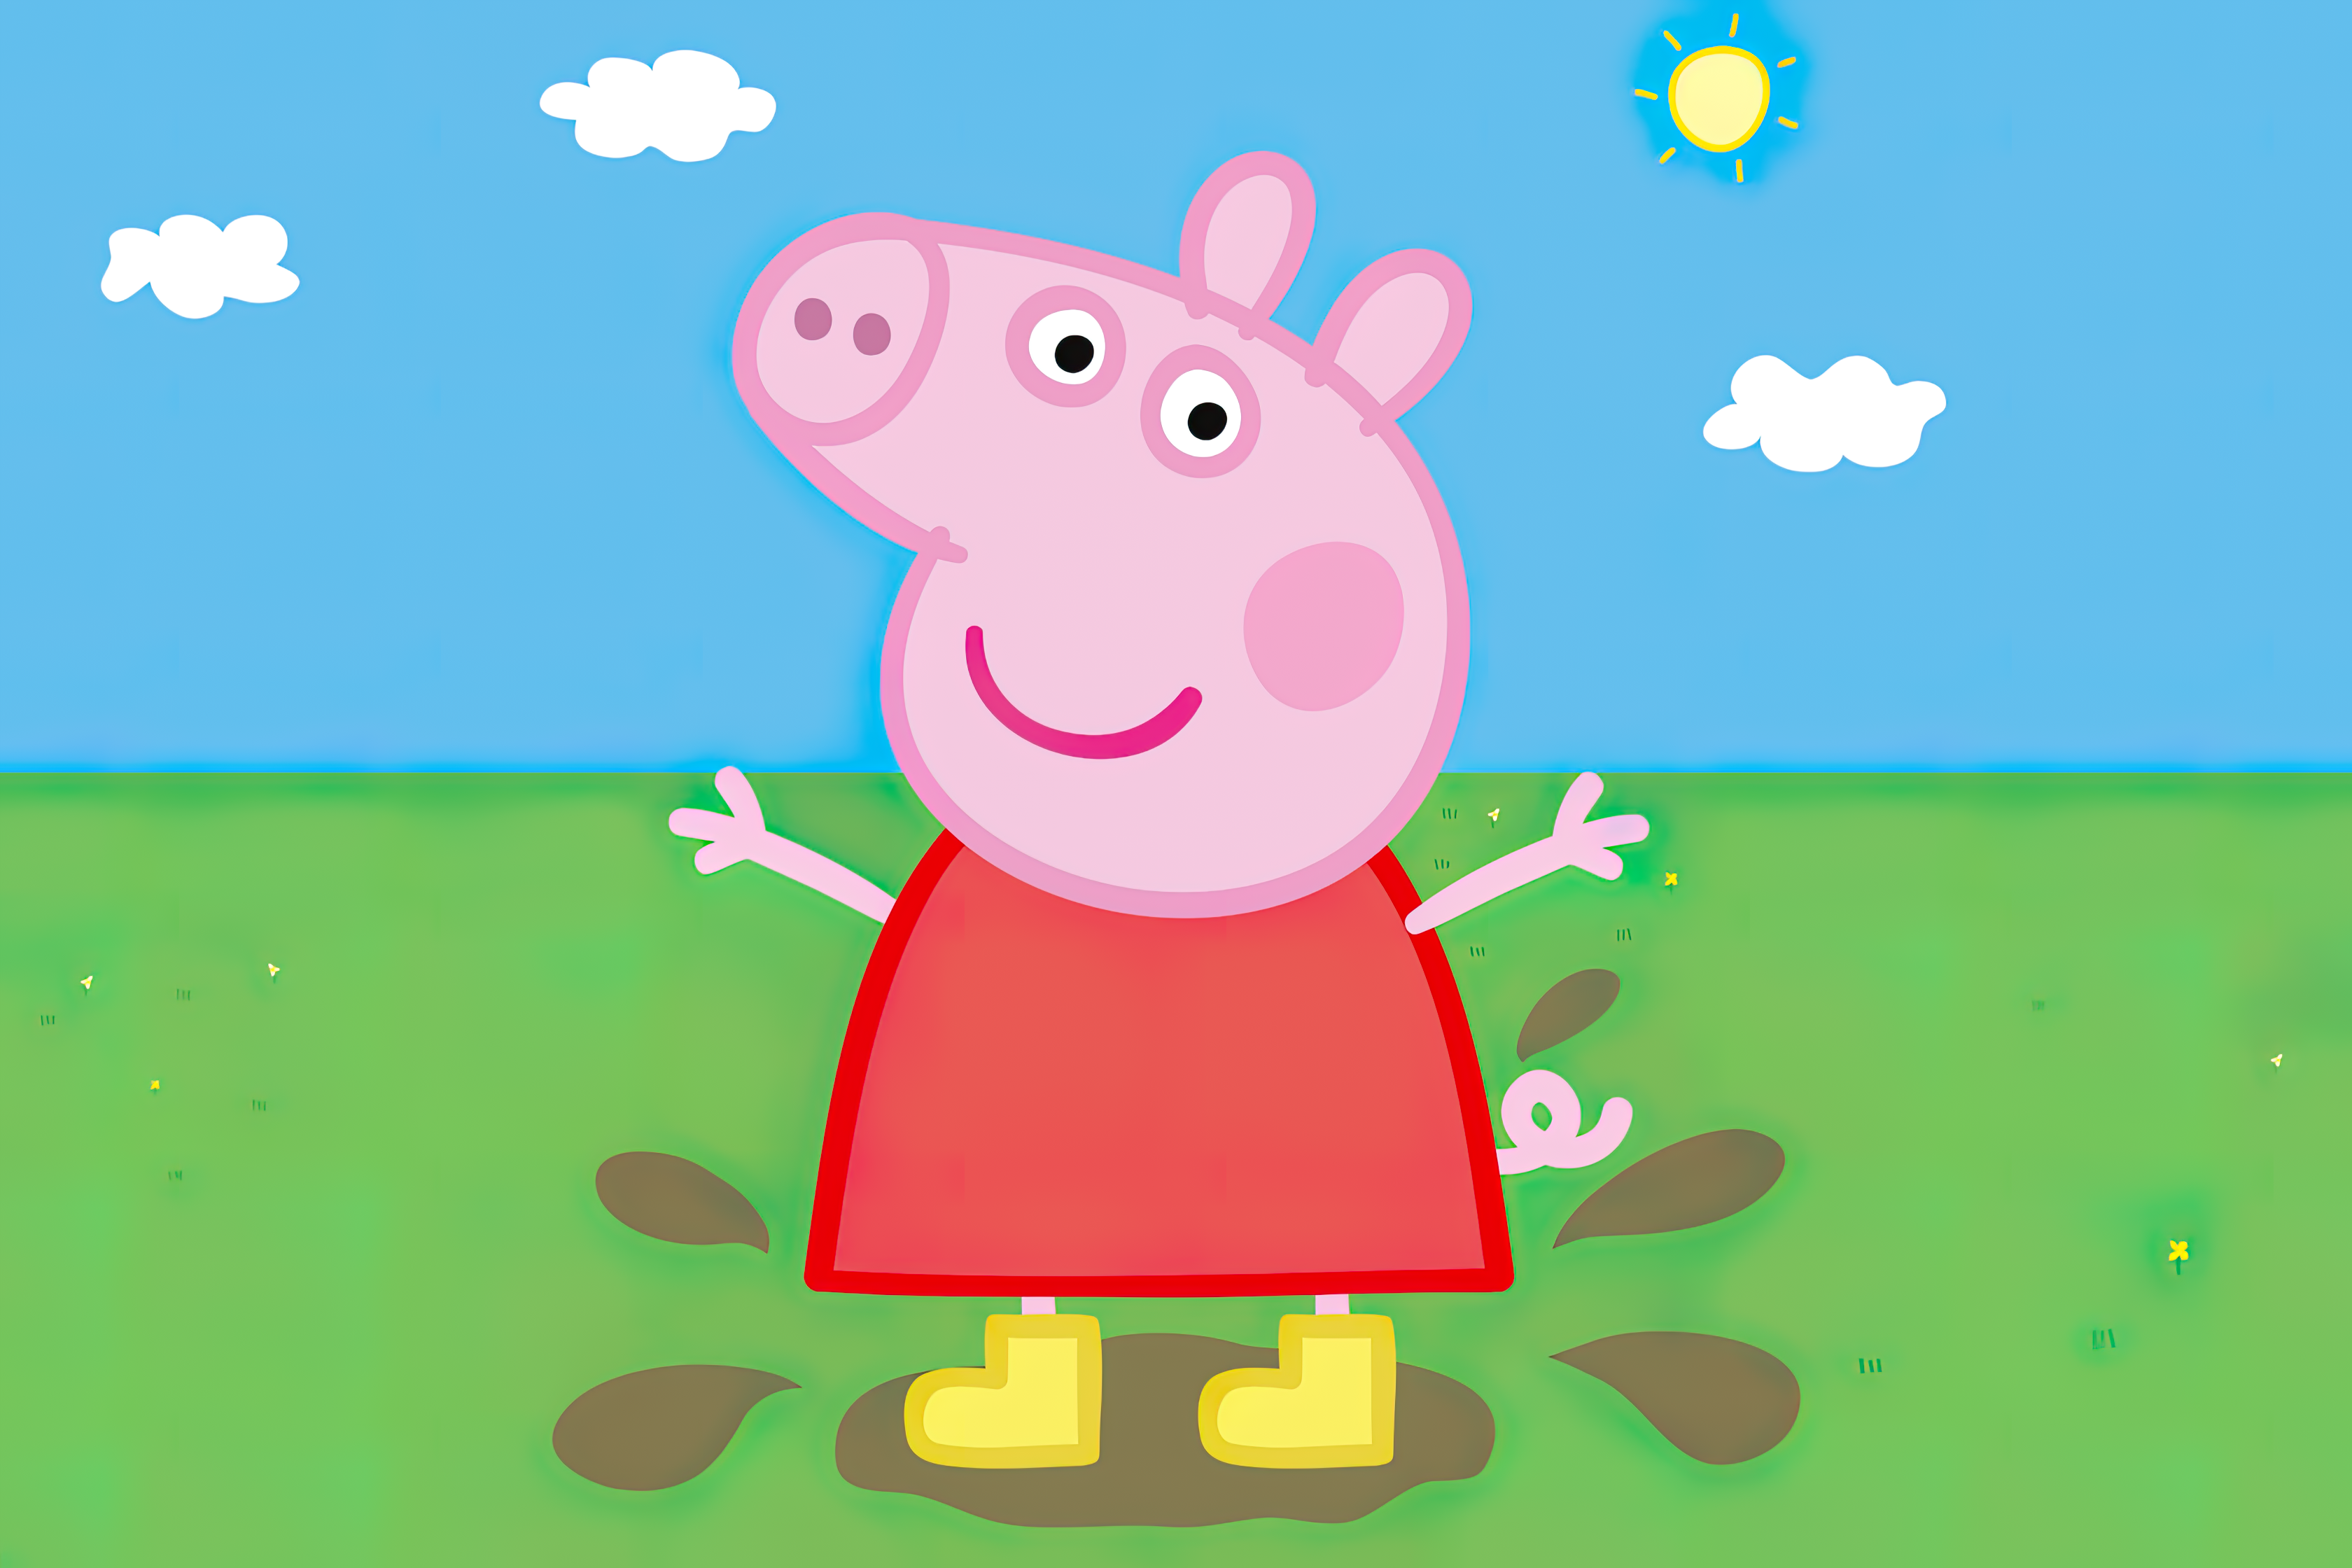 Download Free Peppa Pig House Wallpapers. Discover more Anime